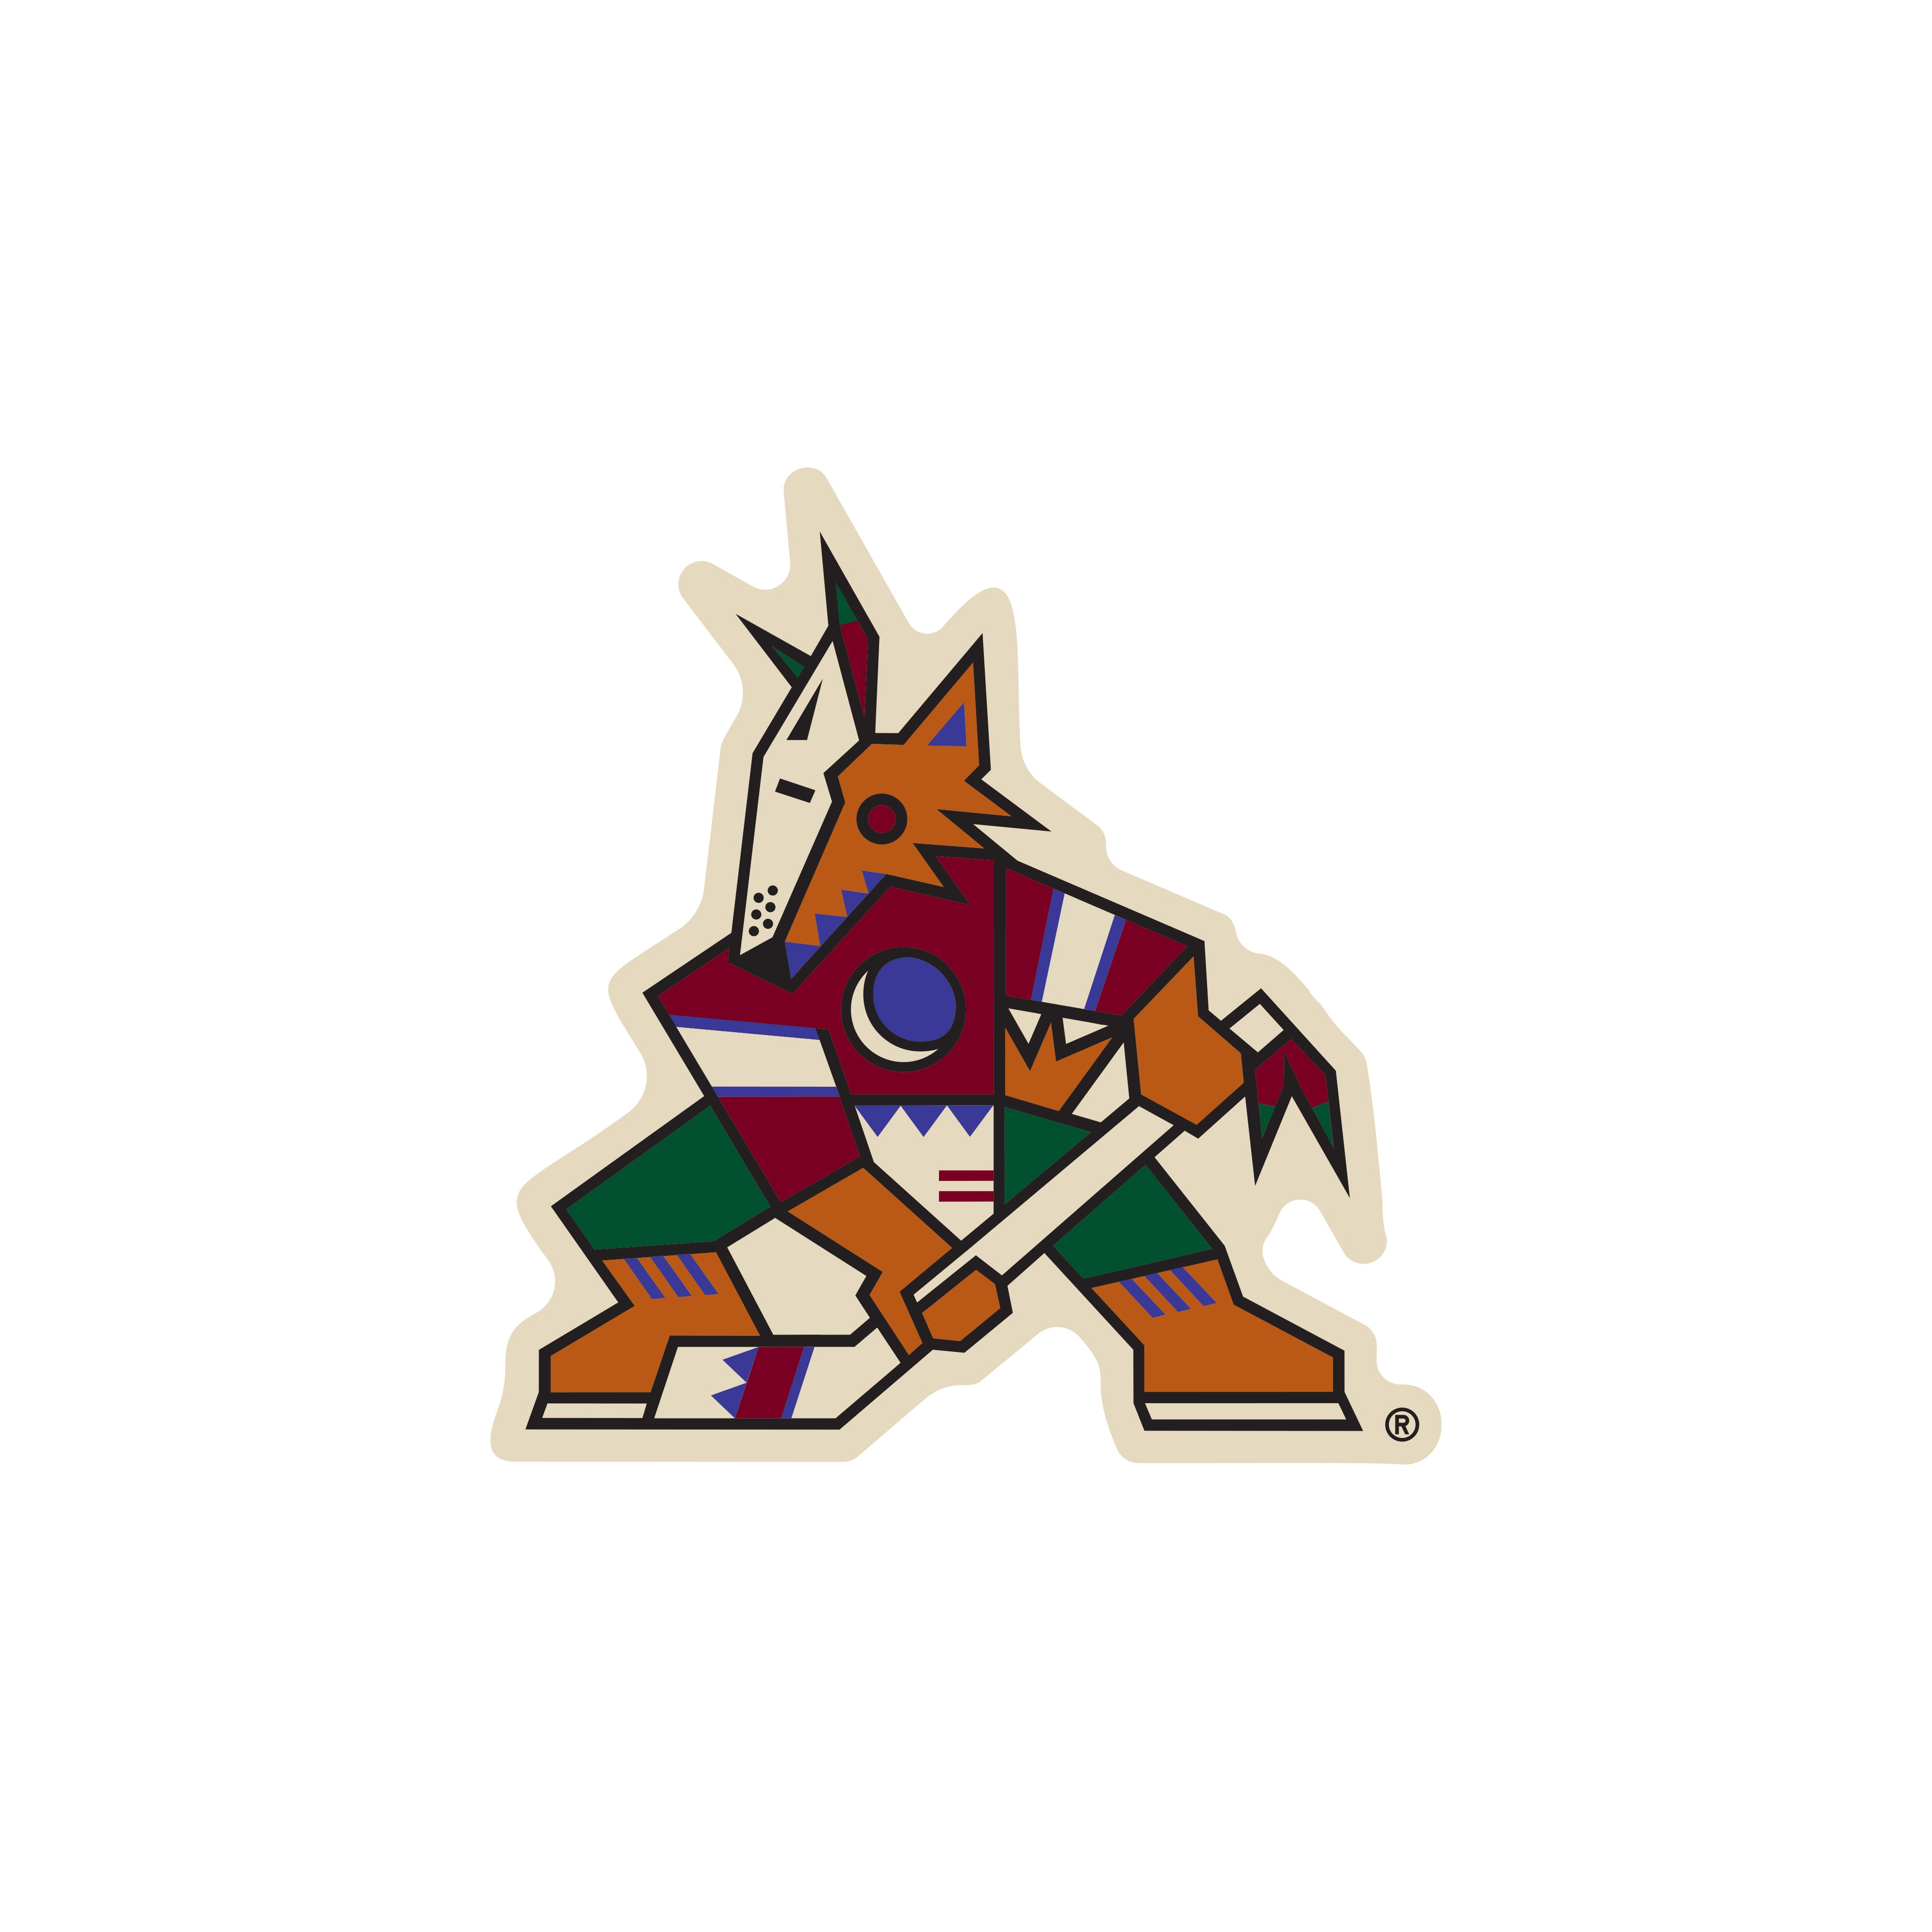 Arizona Coyotes - Need new wallpaper for your phone?